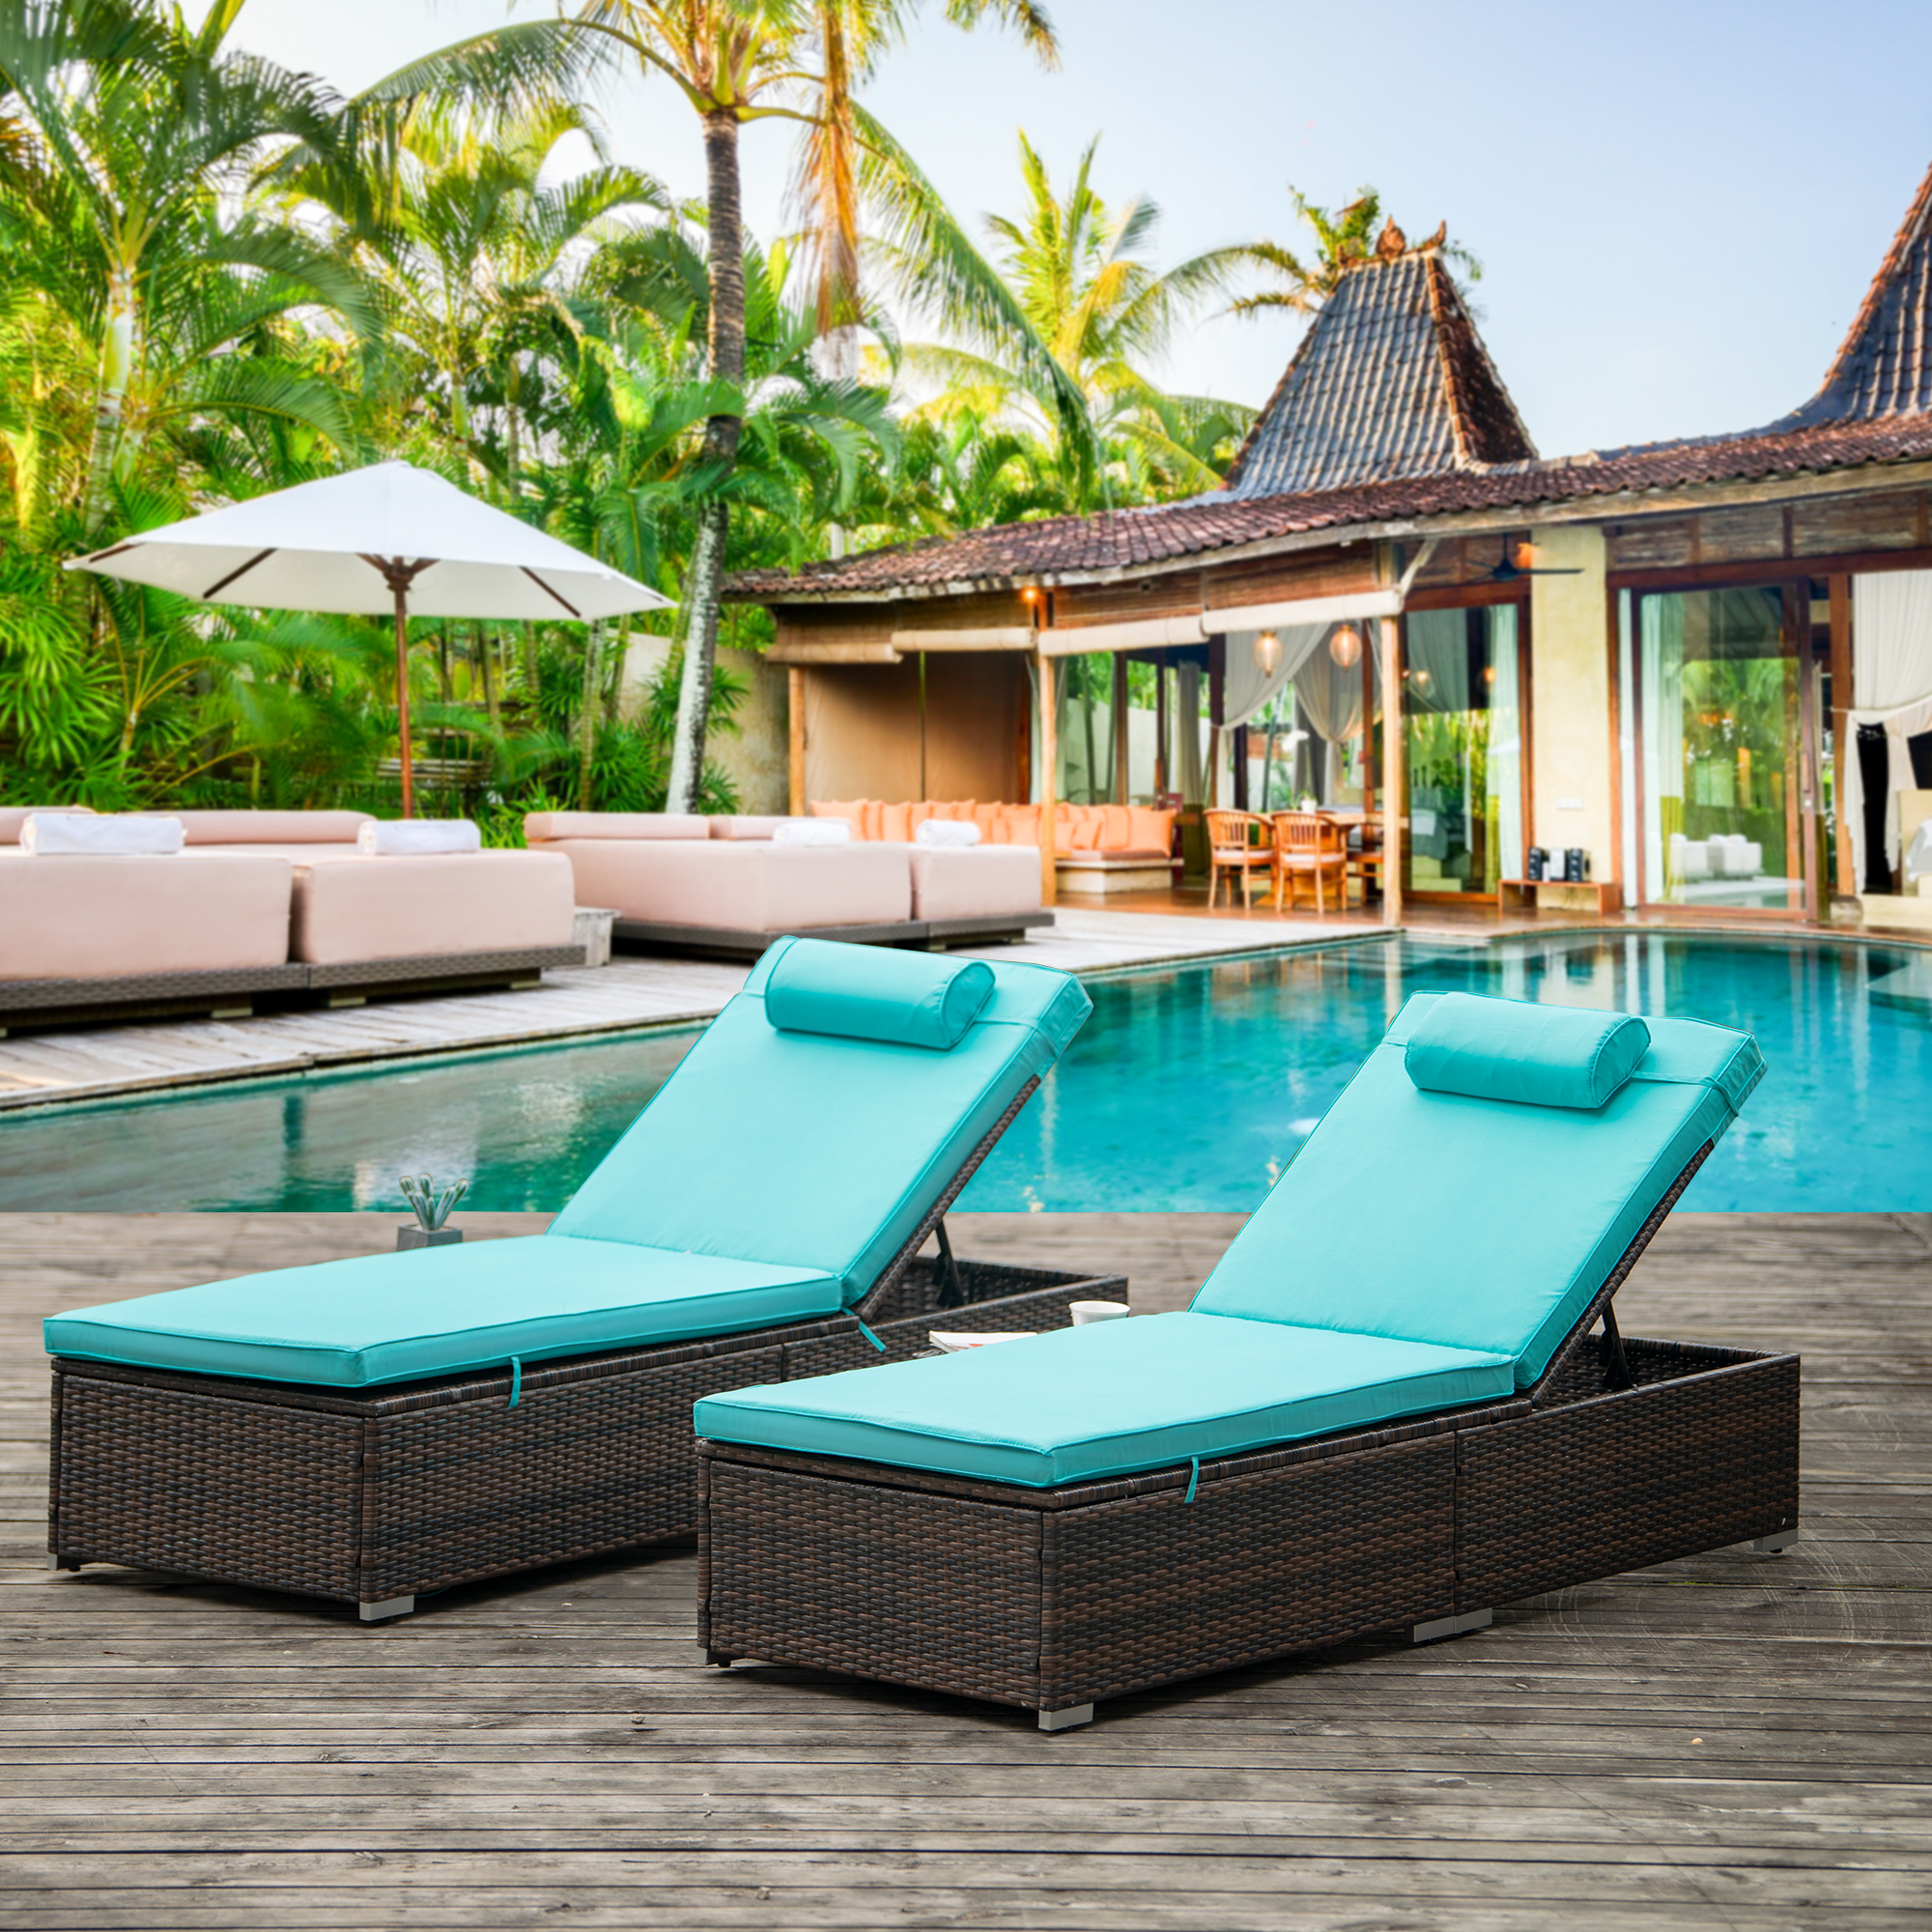 2 Piece Outdoor Patio Chaise Lounge, PE Wicker Lounge Chairs with Adjustable Backrest Recliners and Side Table, Reclining Chair Furniture Set with Cushions for Poolside Deck Patio Garden, K2698 - image 1 of 11